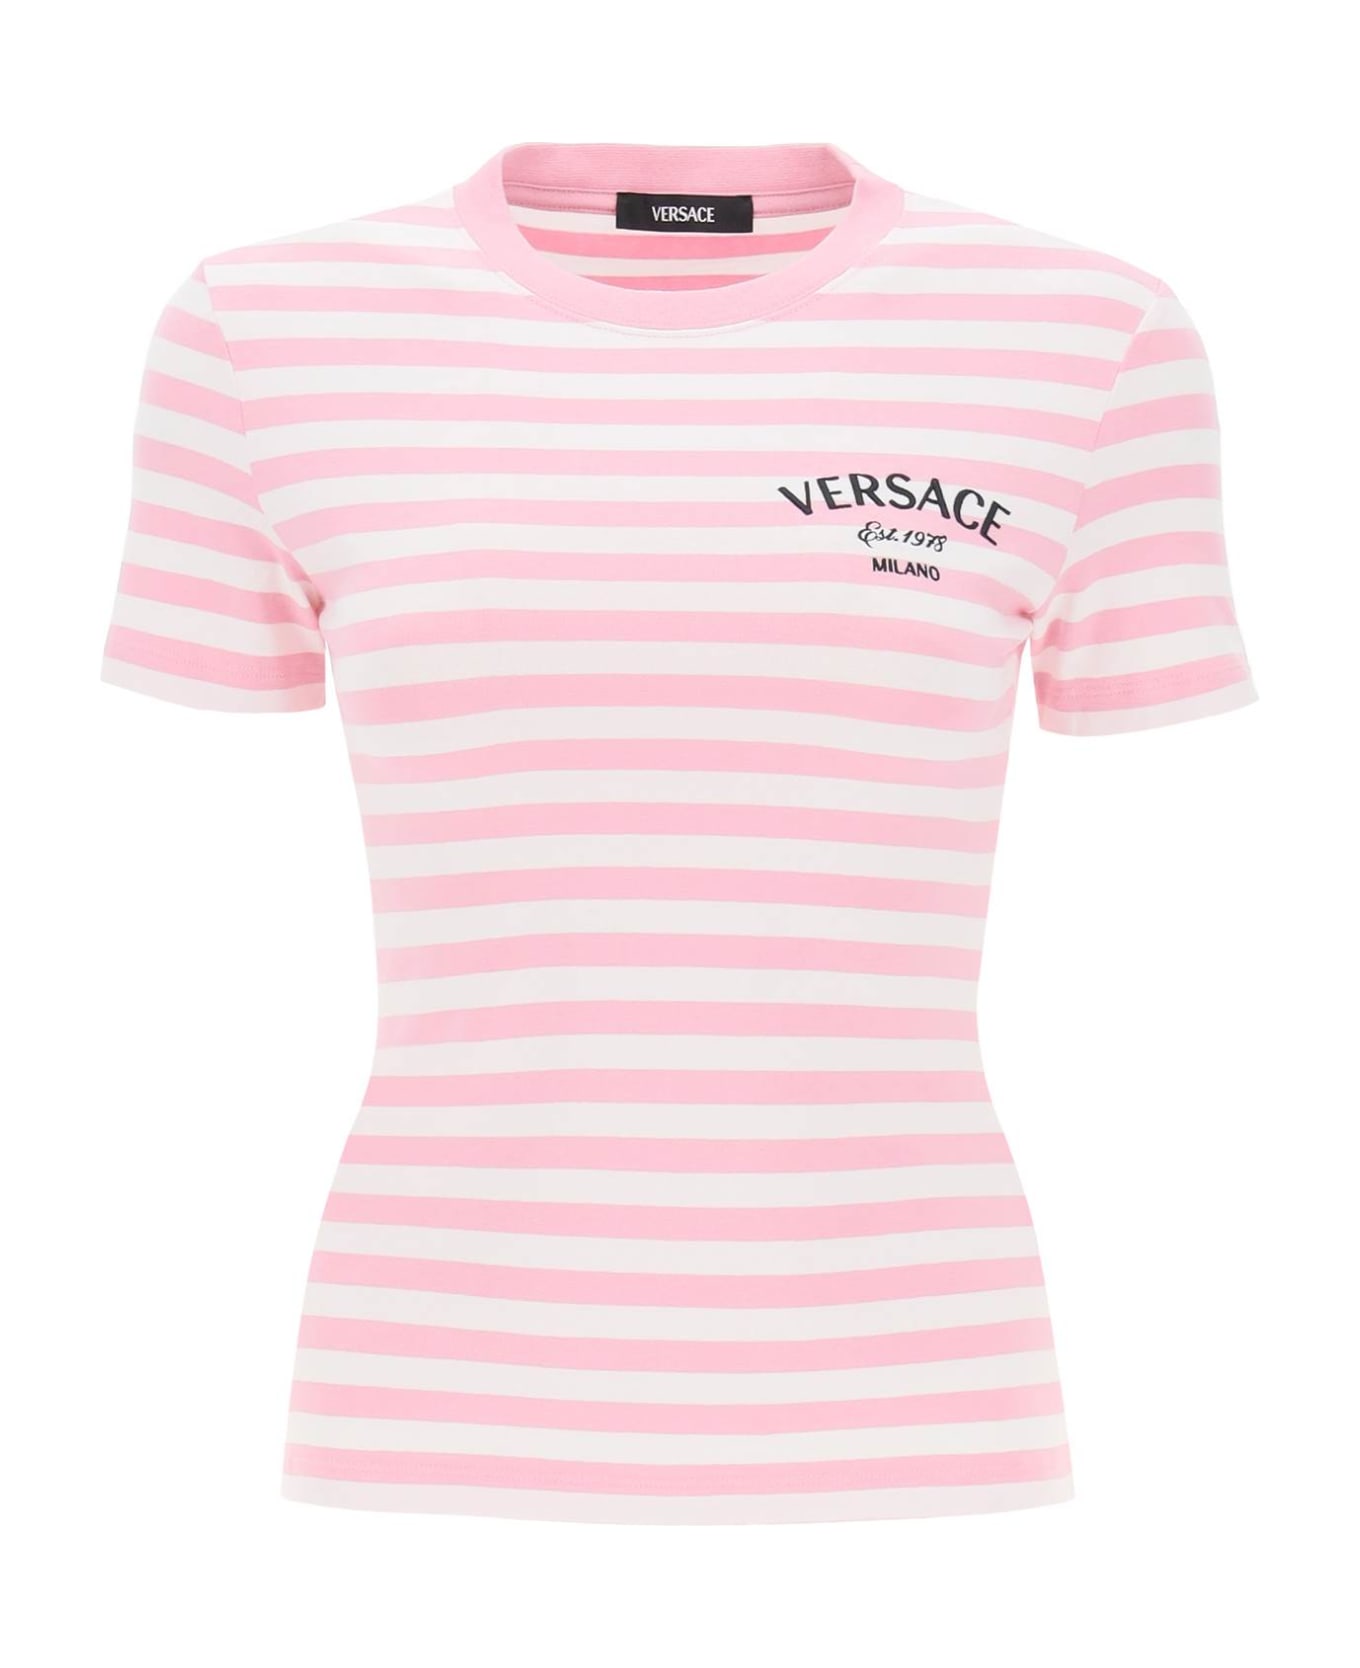 Versace Logo-embroidered Crewneck Striped T-shirt - WHITE PALE PINK MULTICOLO (White)